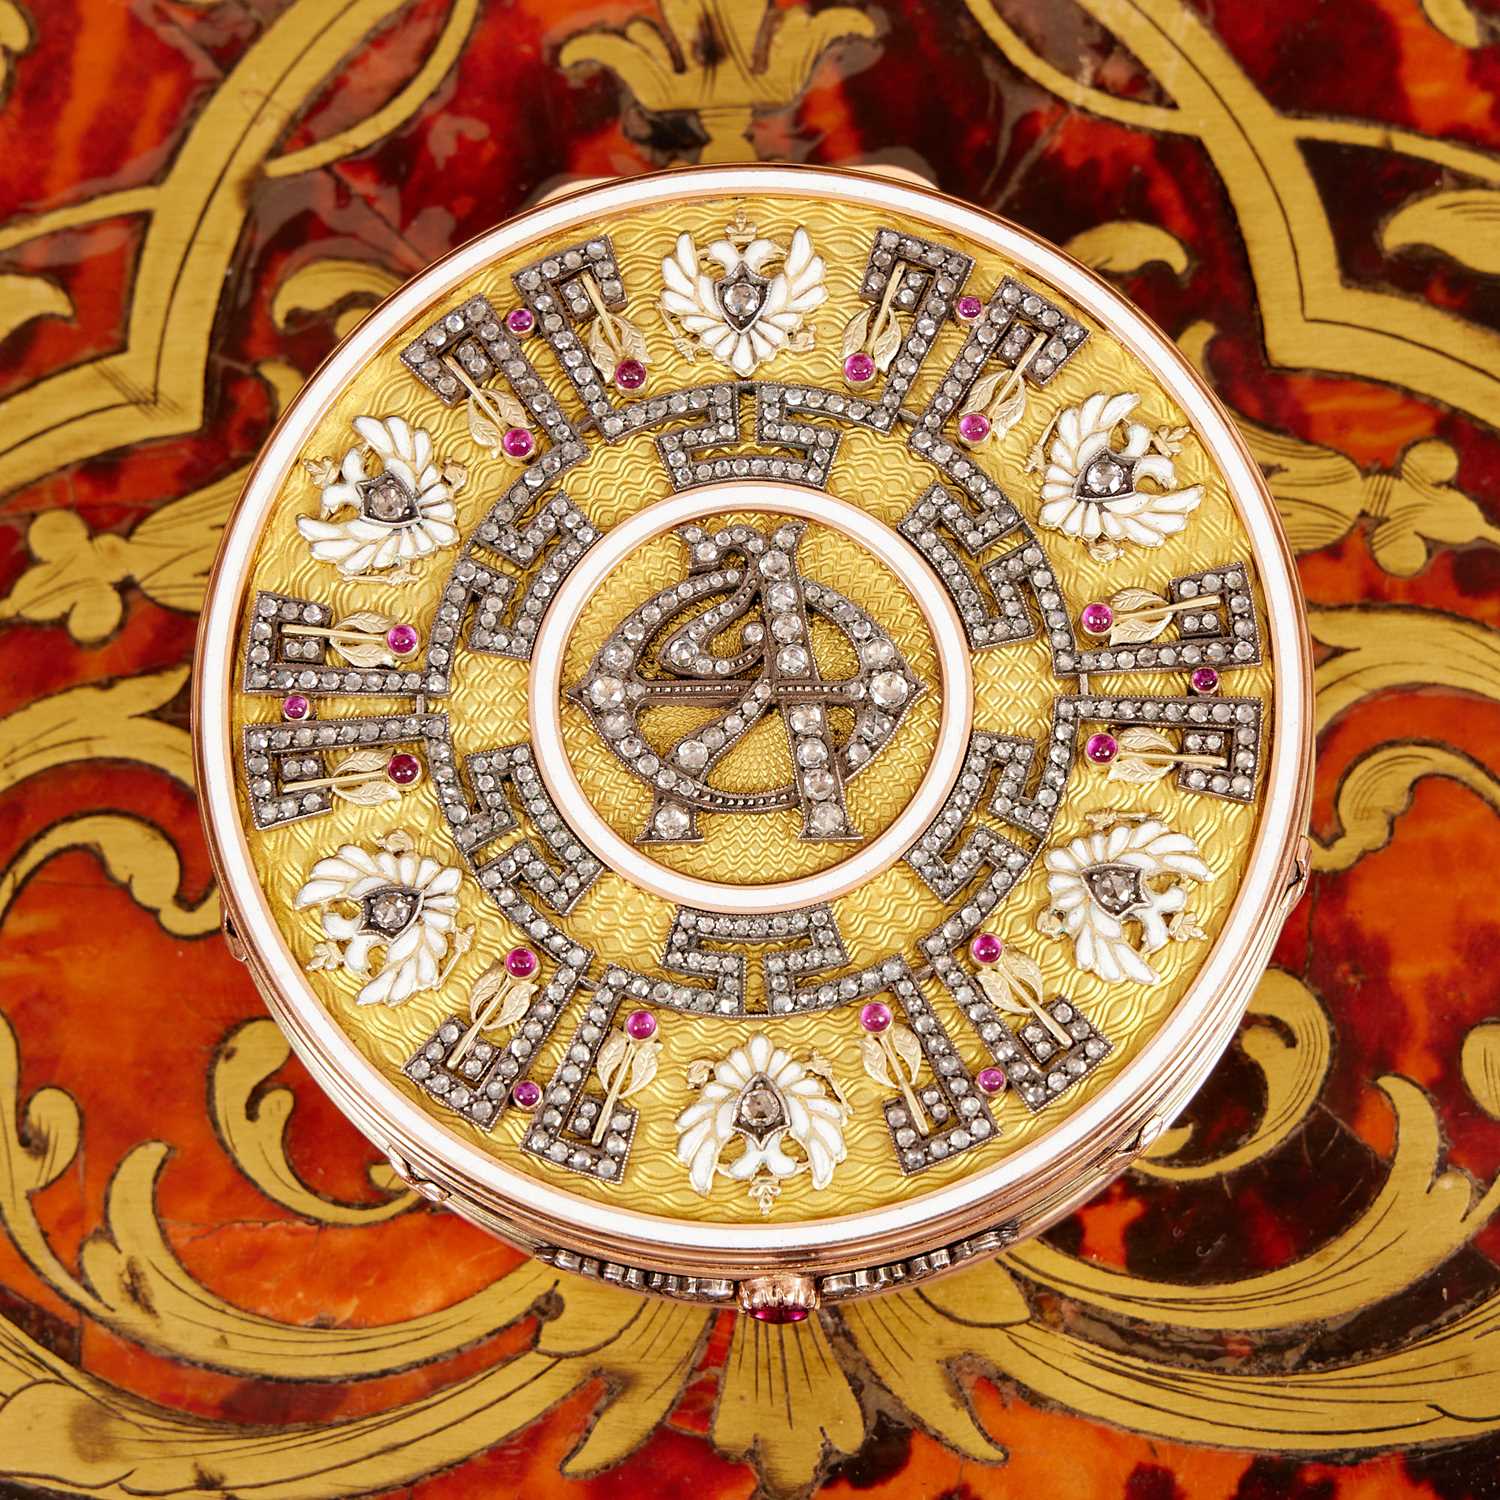 A 14 CARAT GOLD, DIAMOND AND ENAMEL BOX IN THE STYLE OF FABERGE - Image 2 of 6